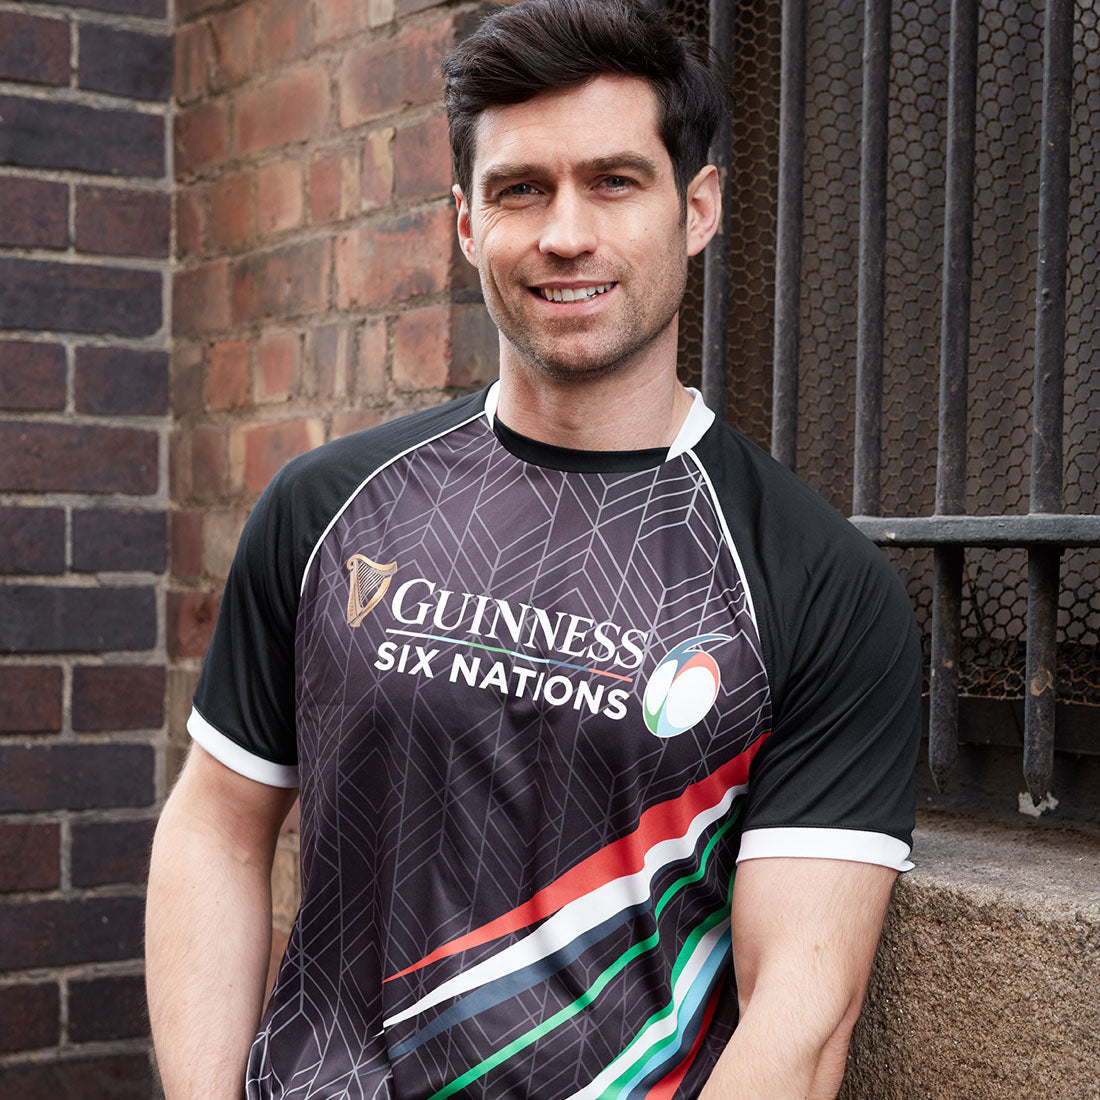 6 NATIONS GUINNESS JERSEY S/S